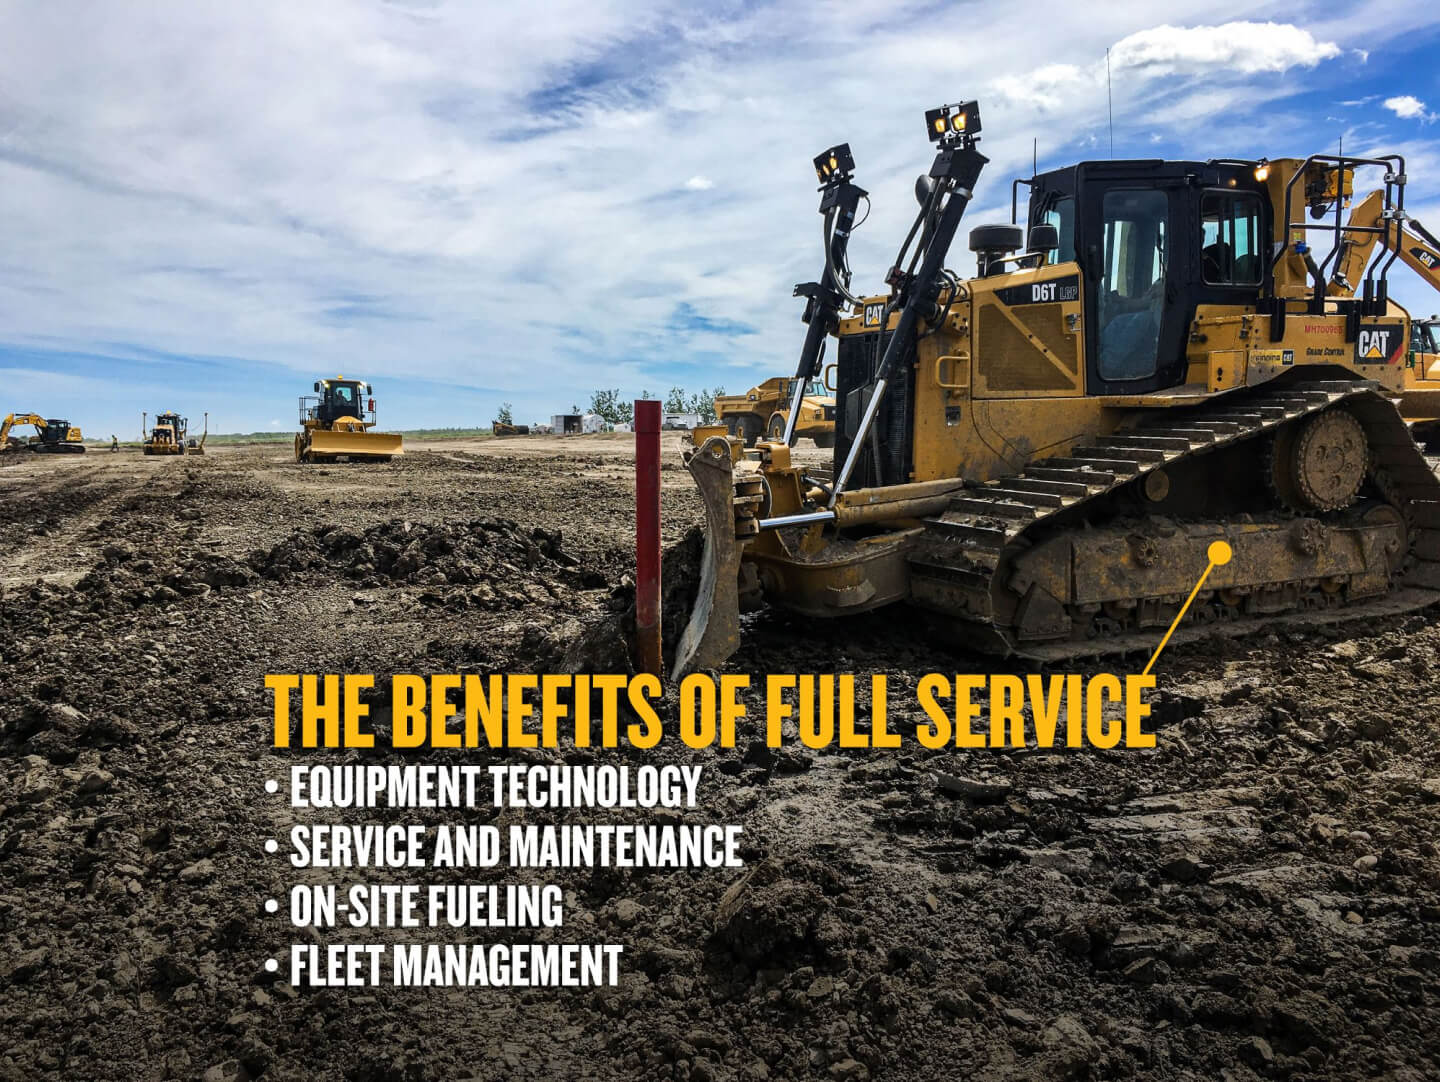 The benefits of full service